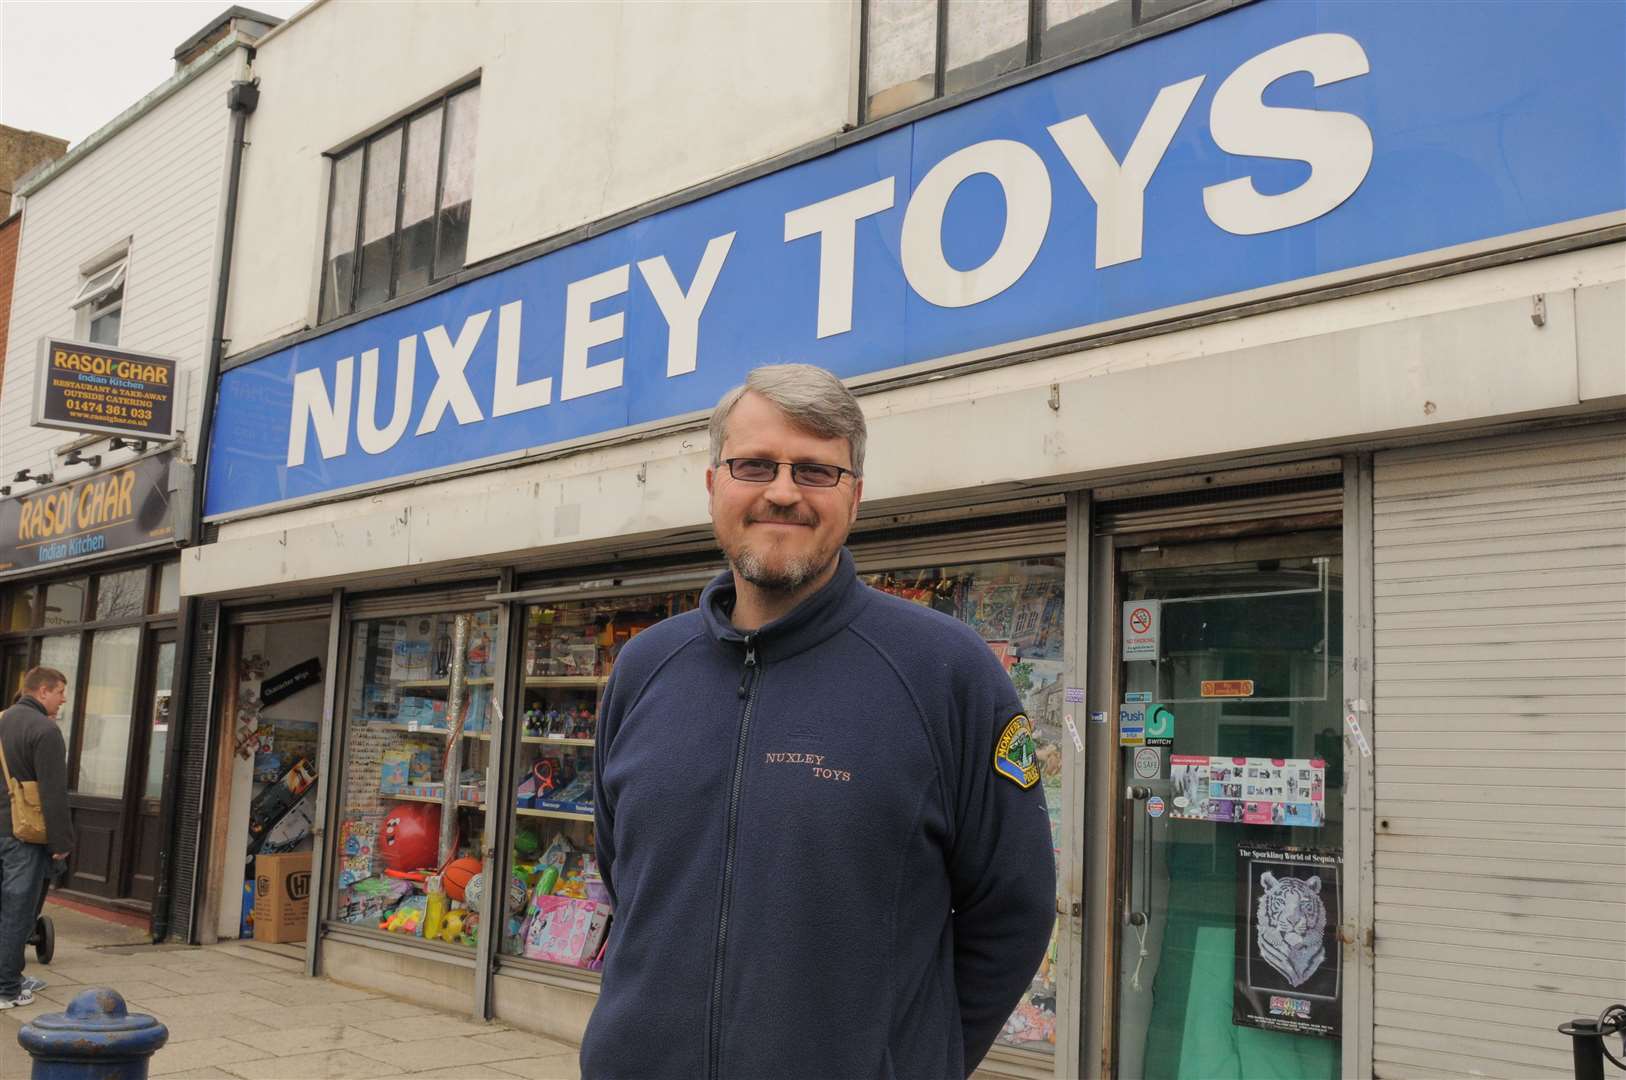 The shop in Milton Road will close today after 44 years trade. Picture: Steve Crispe